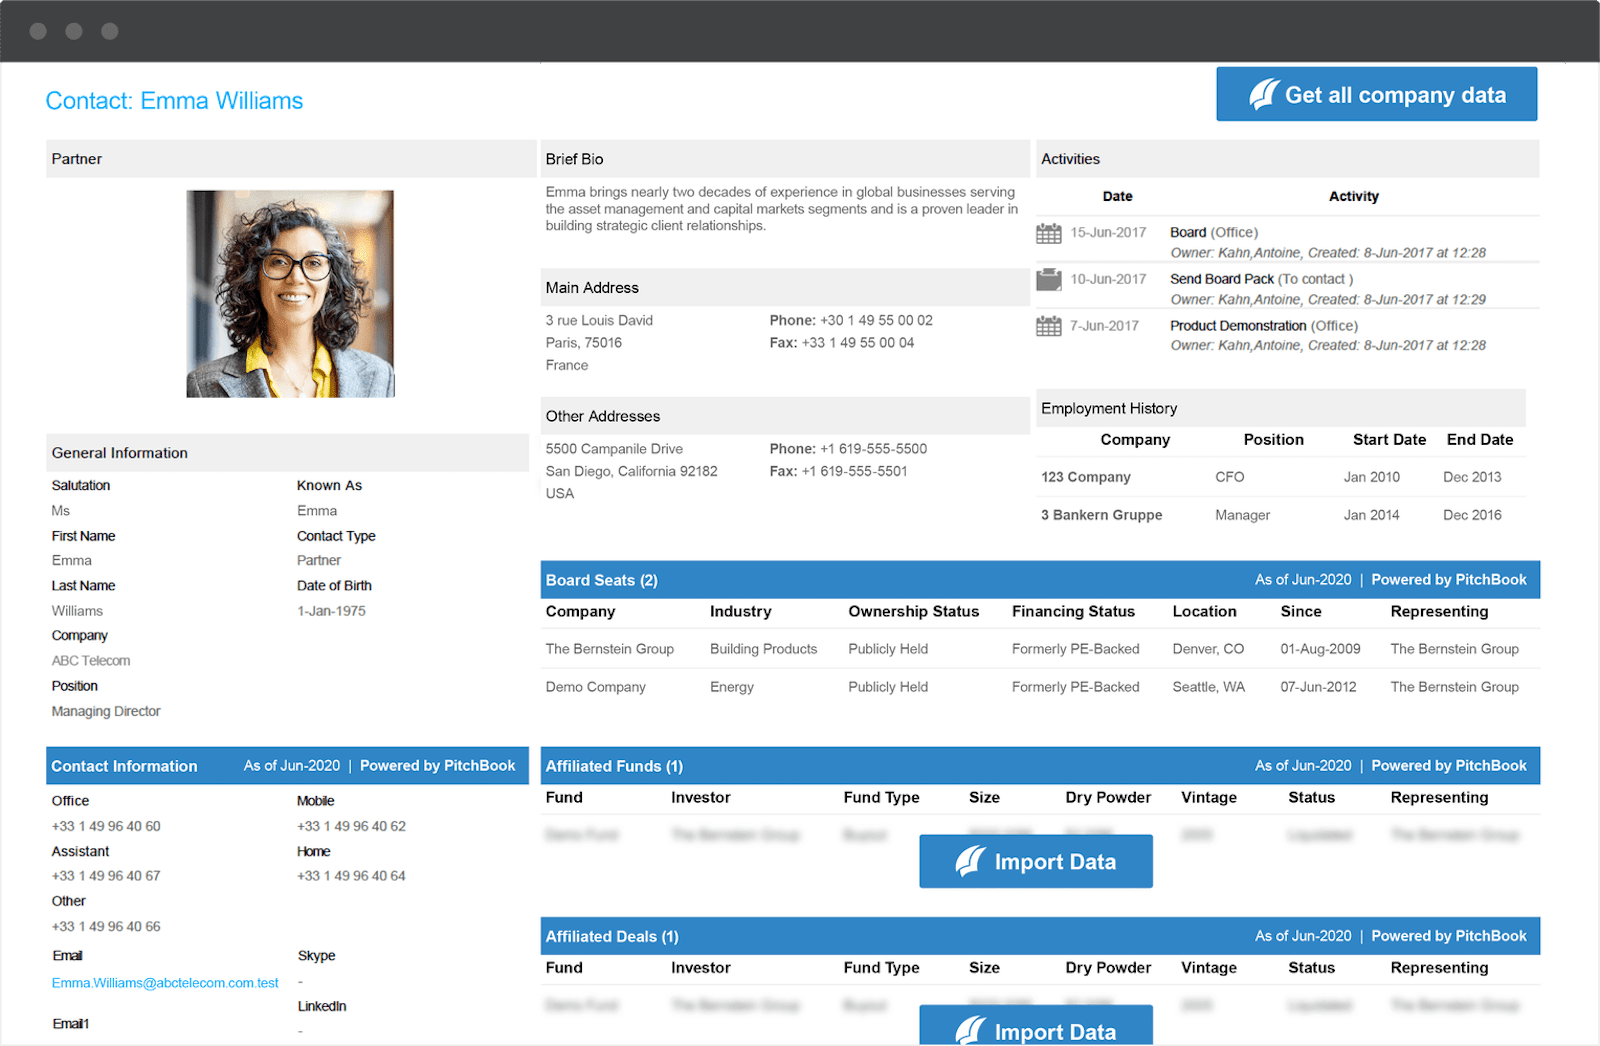 CRM contact page for Emma Williams showing data imported from PitchBook.